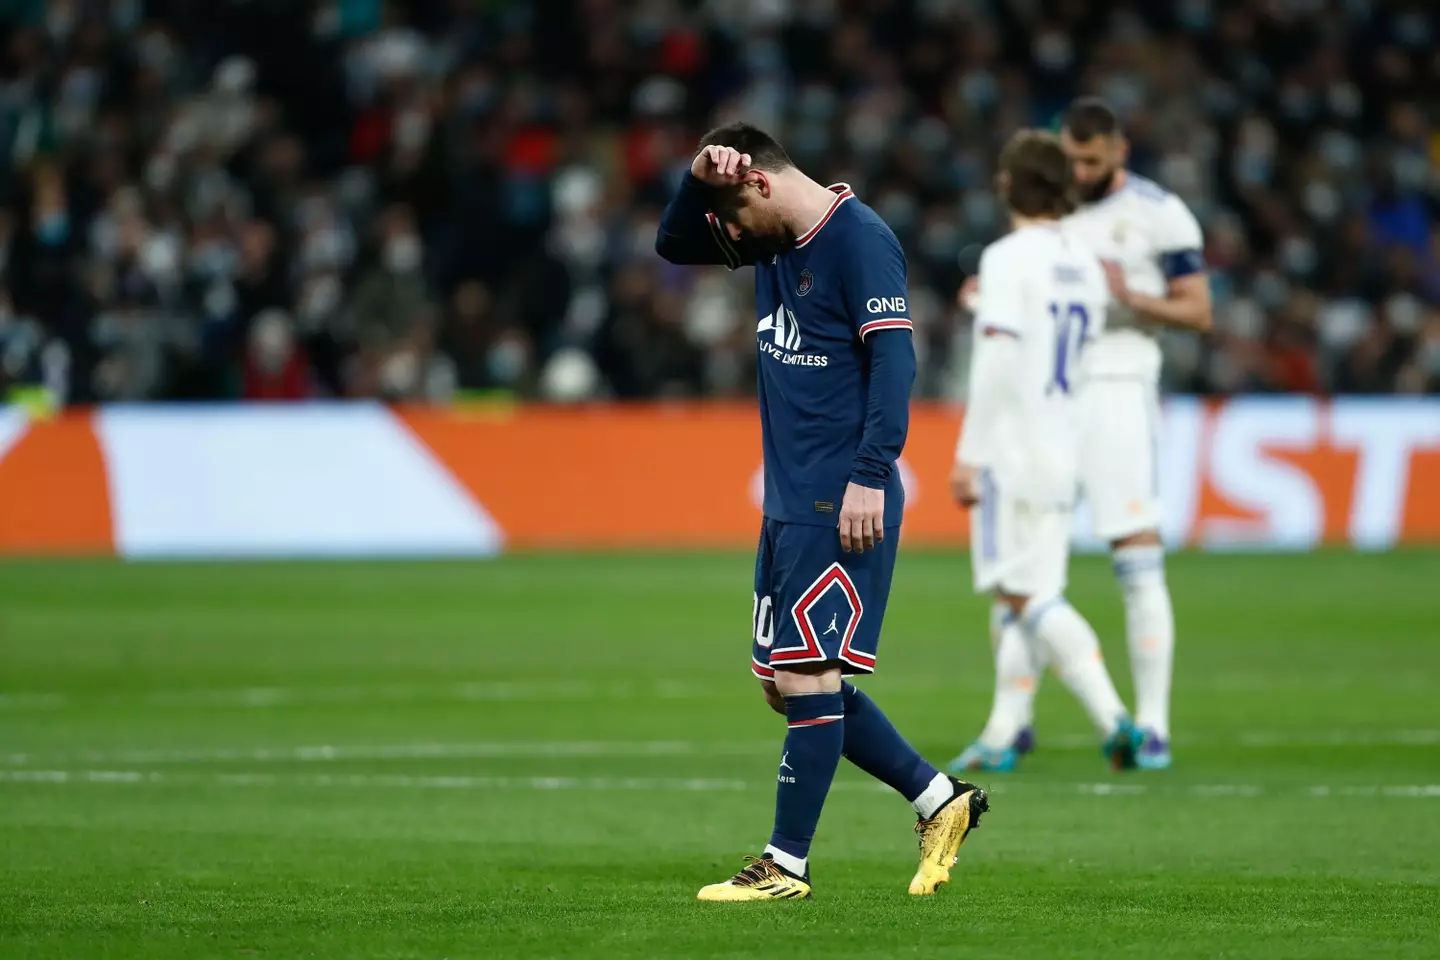 Messi struggled to make an impact against Real Madrid (Image: PA)